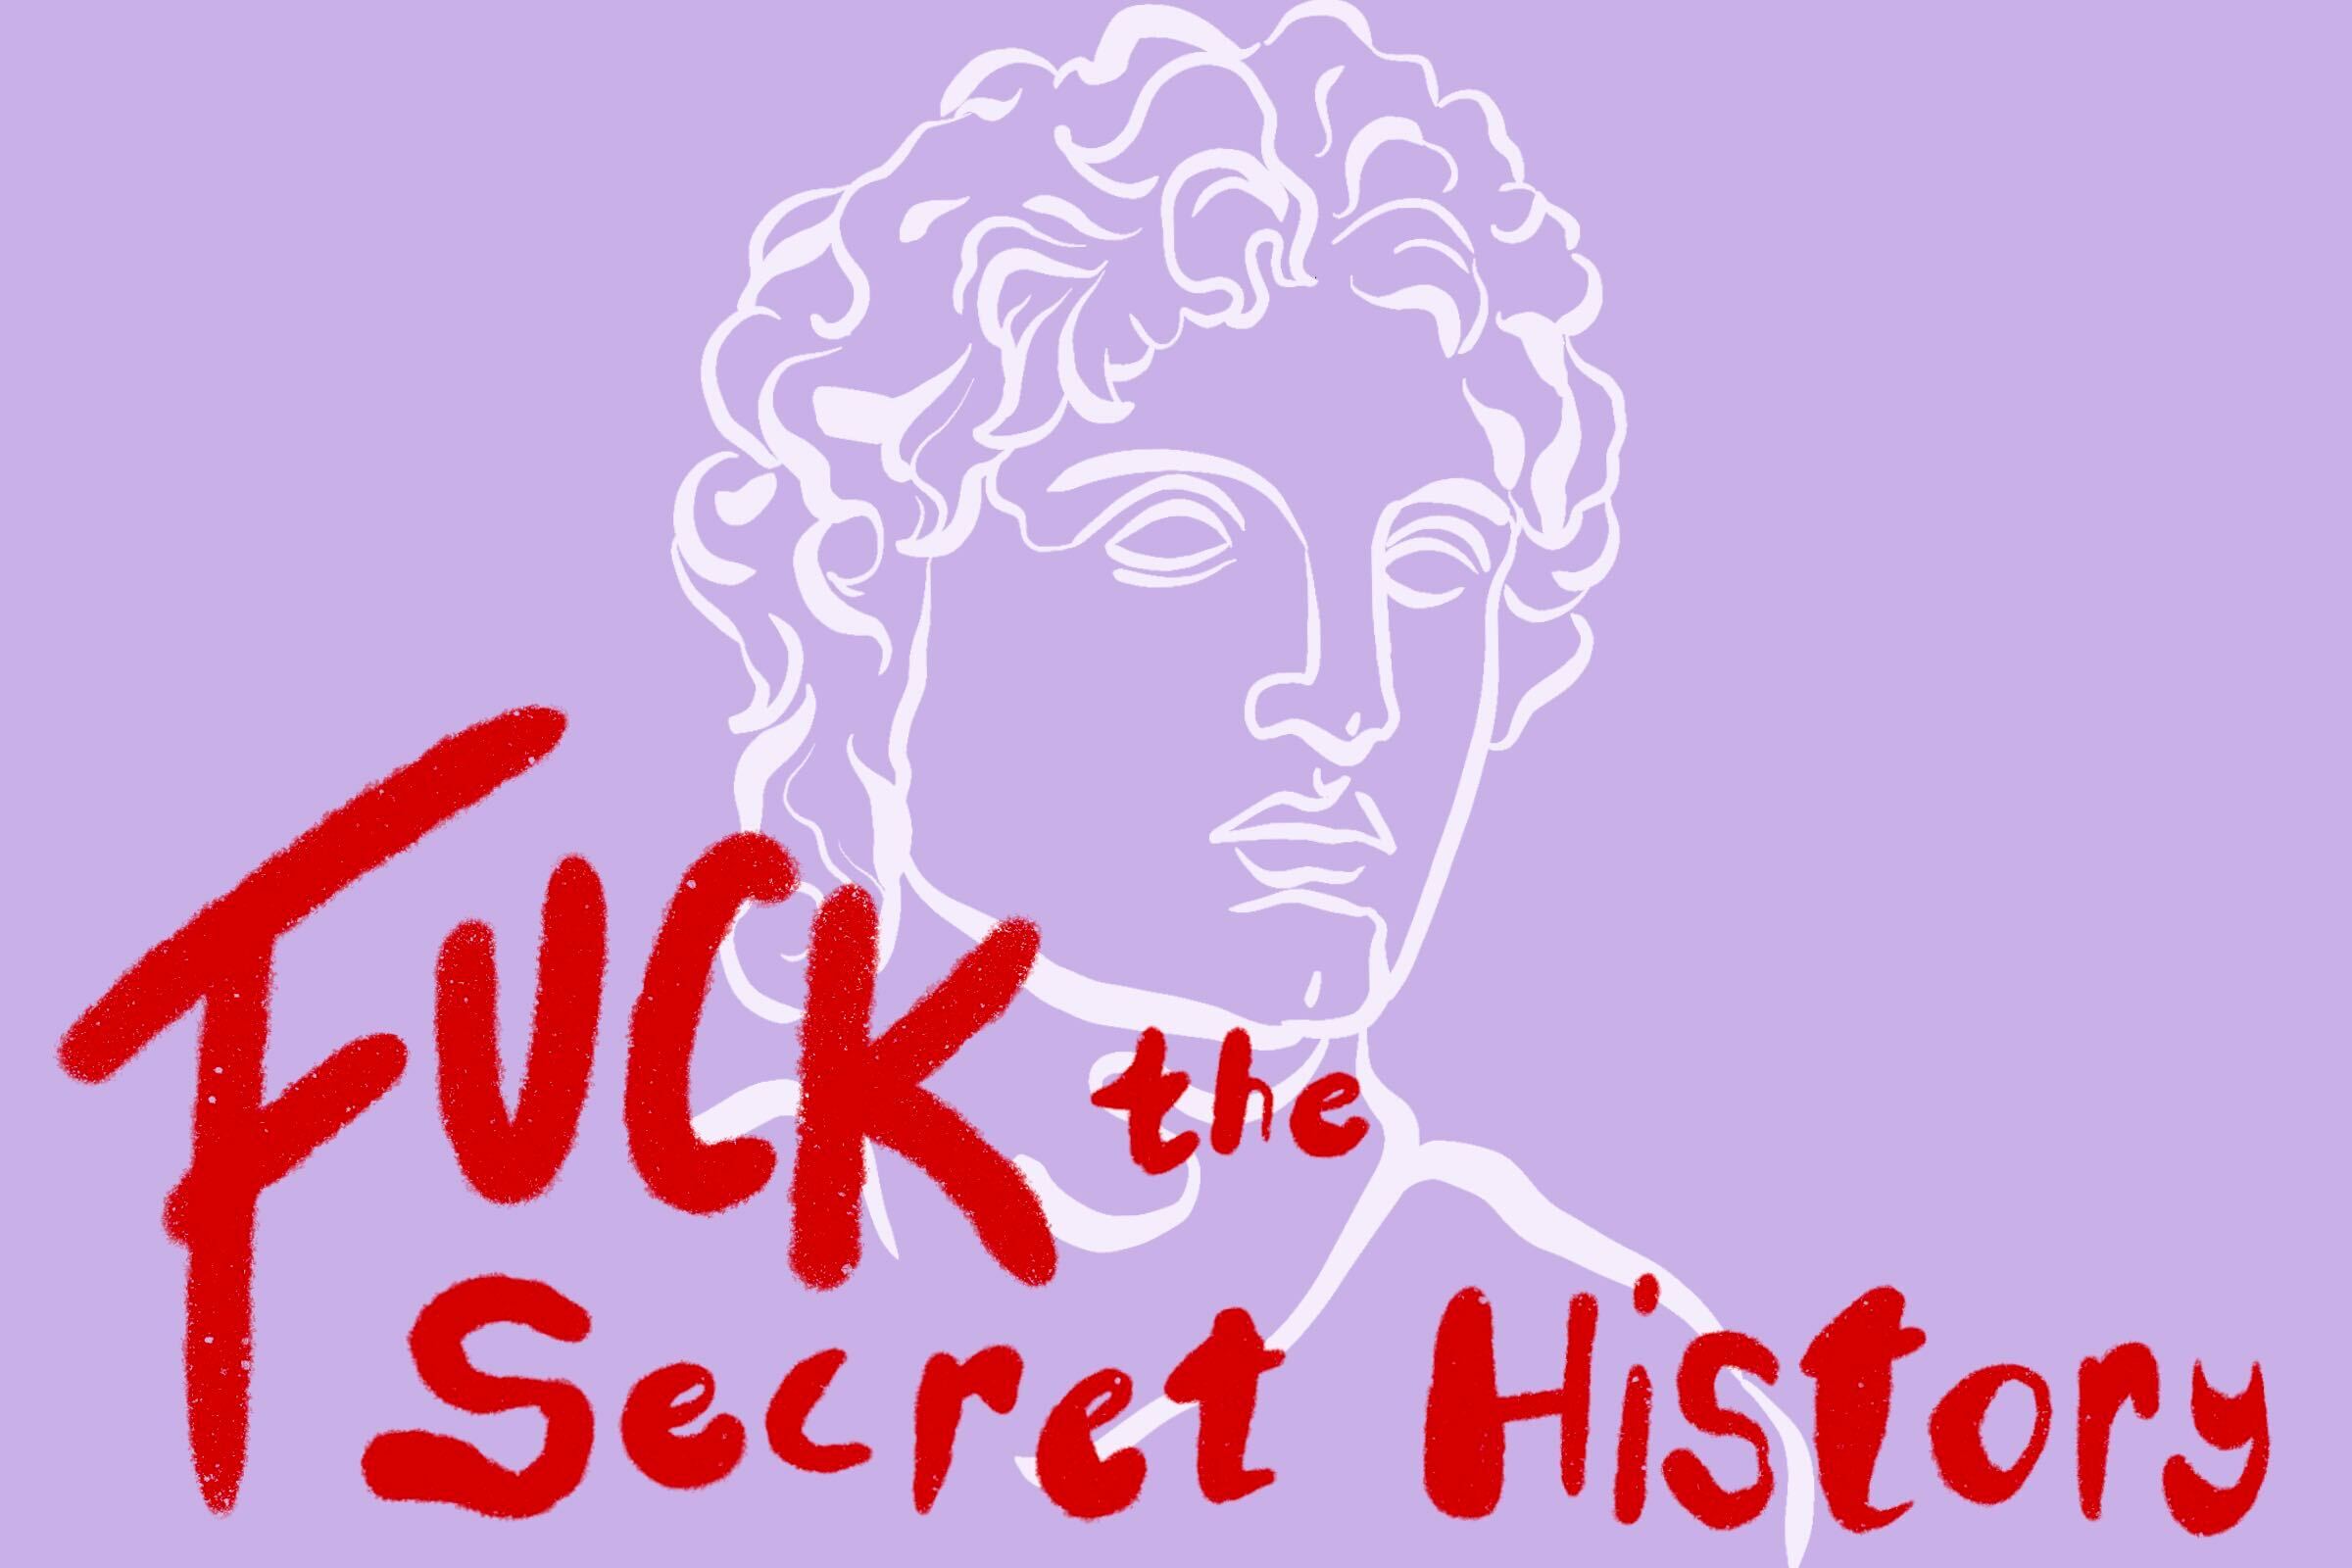 The Secret History' is not a good book